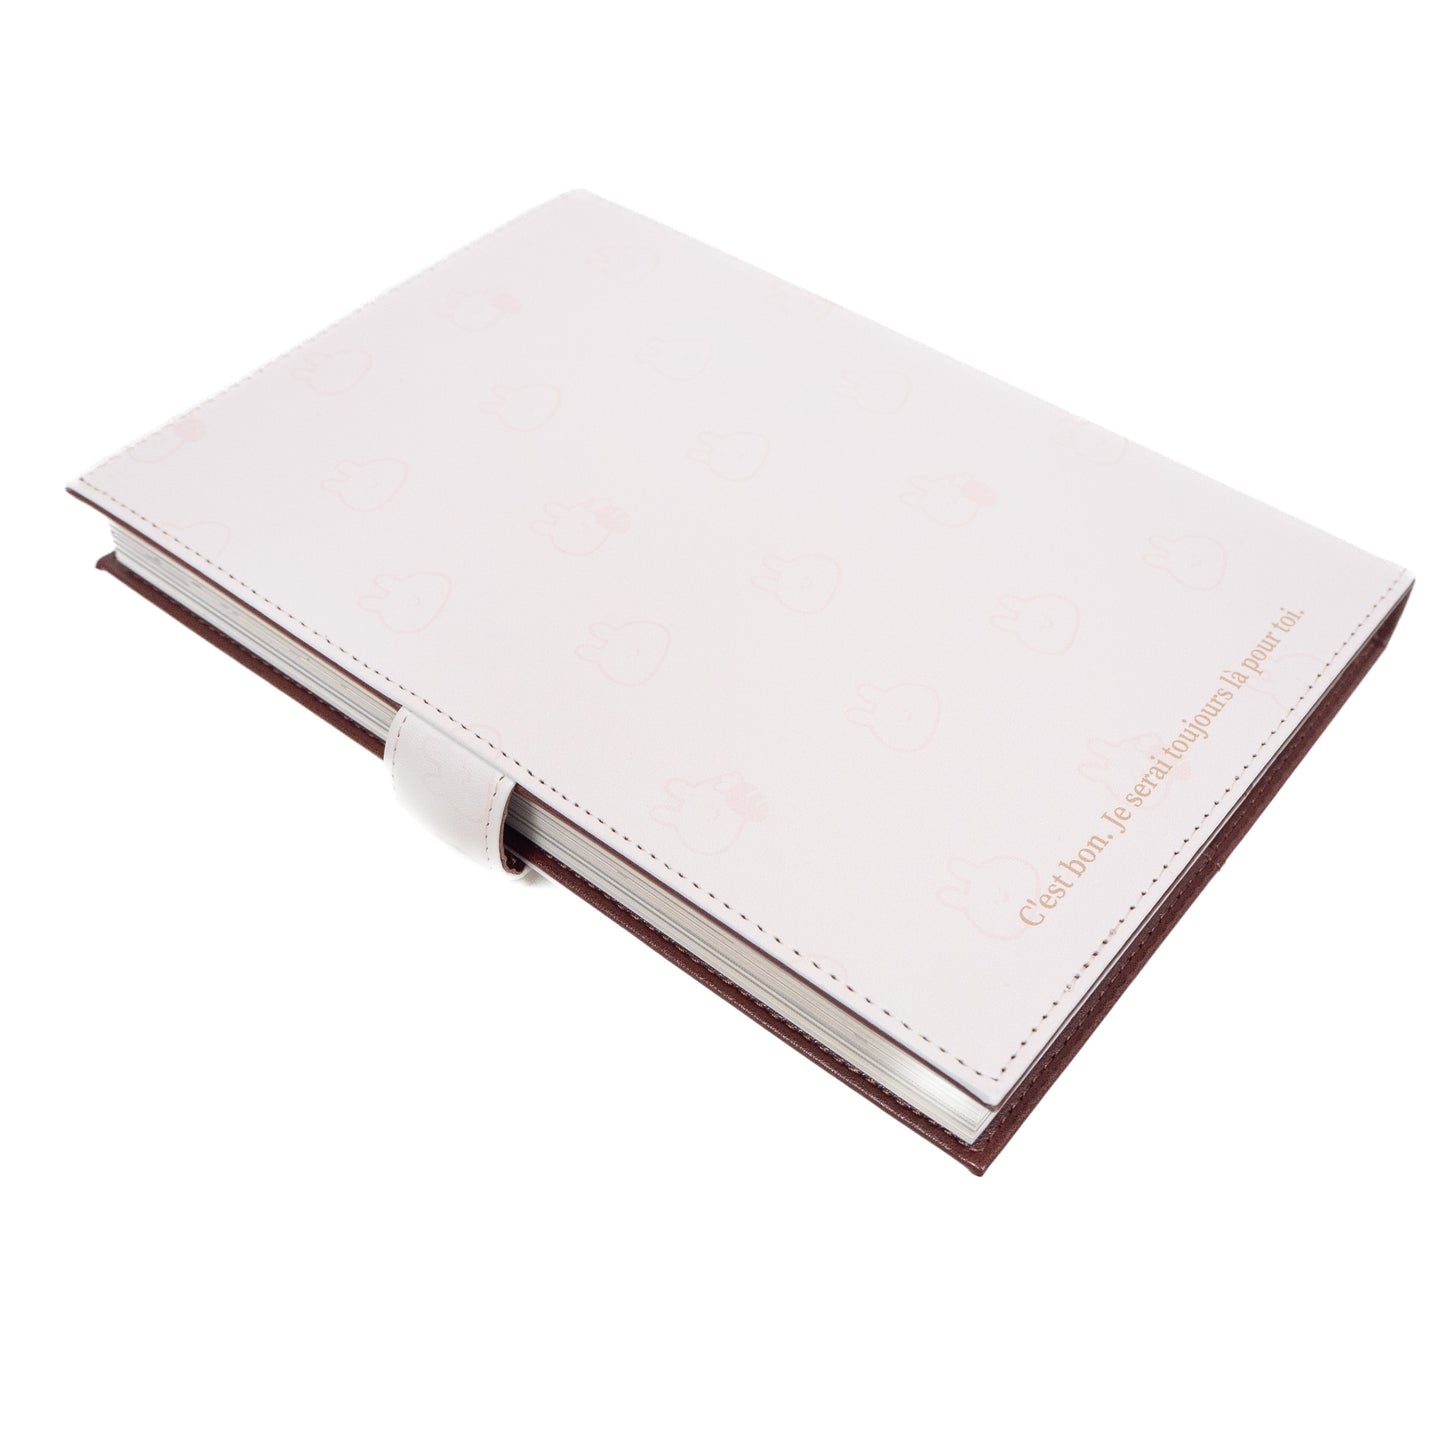 [Asamimi-chan] Synthetic leather book cover (French girly) [Shipped in early December]